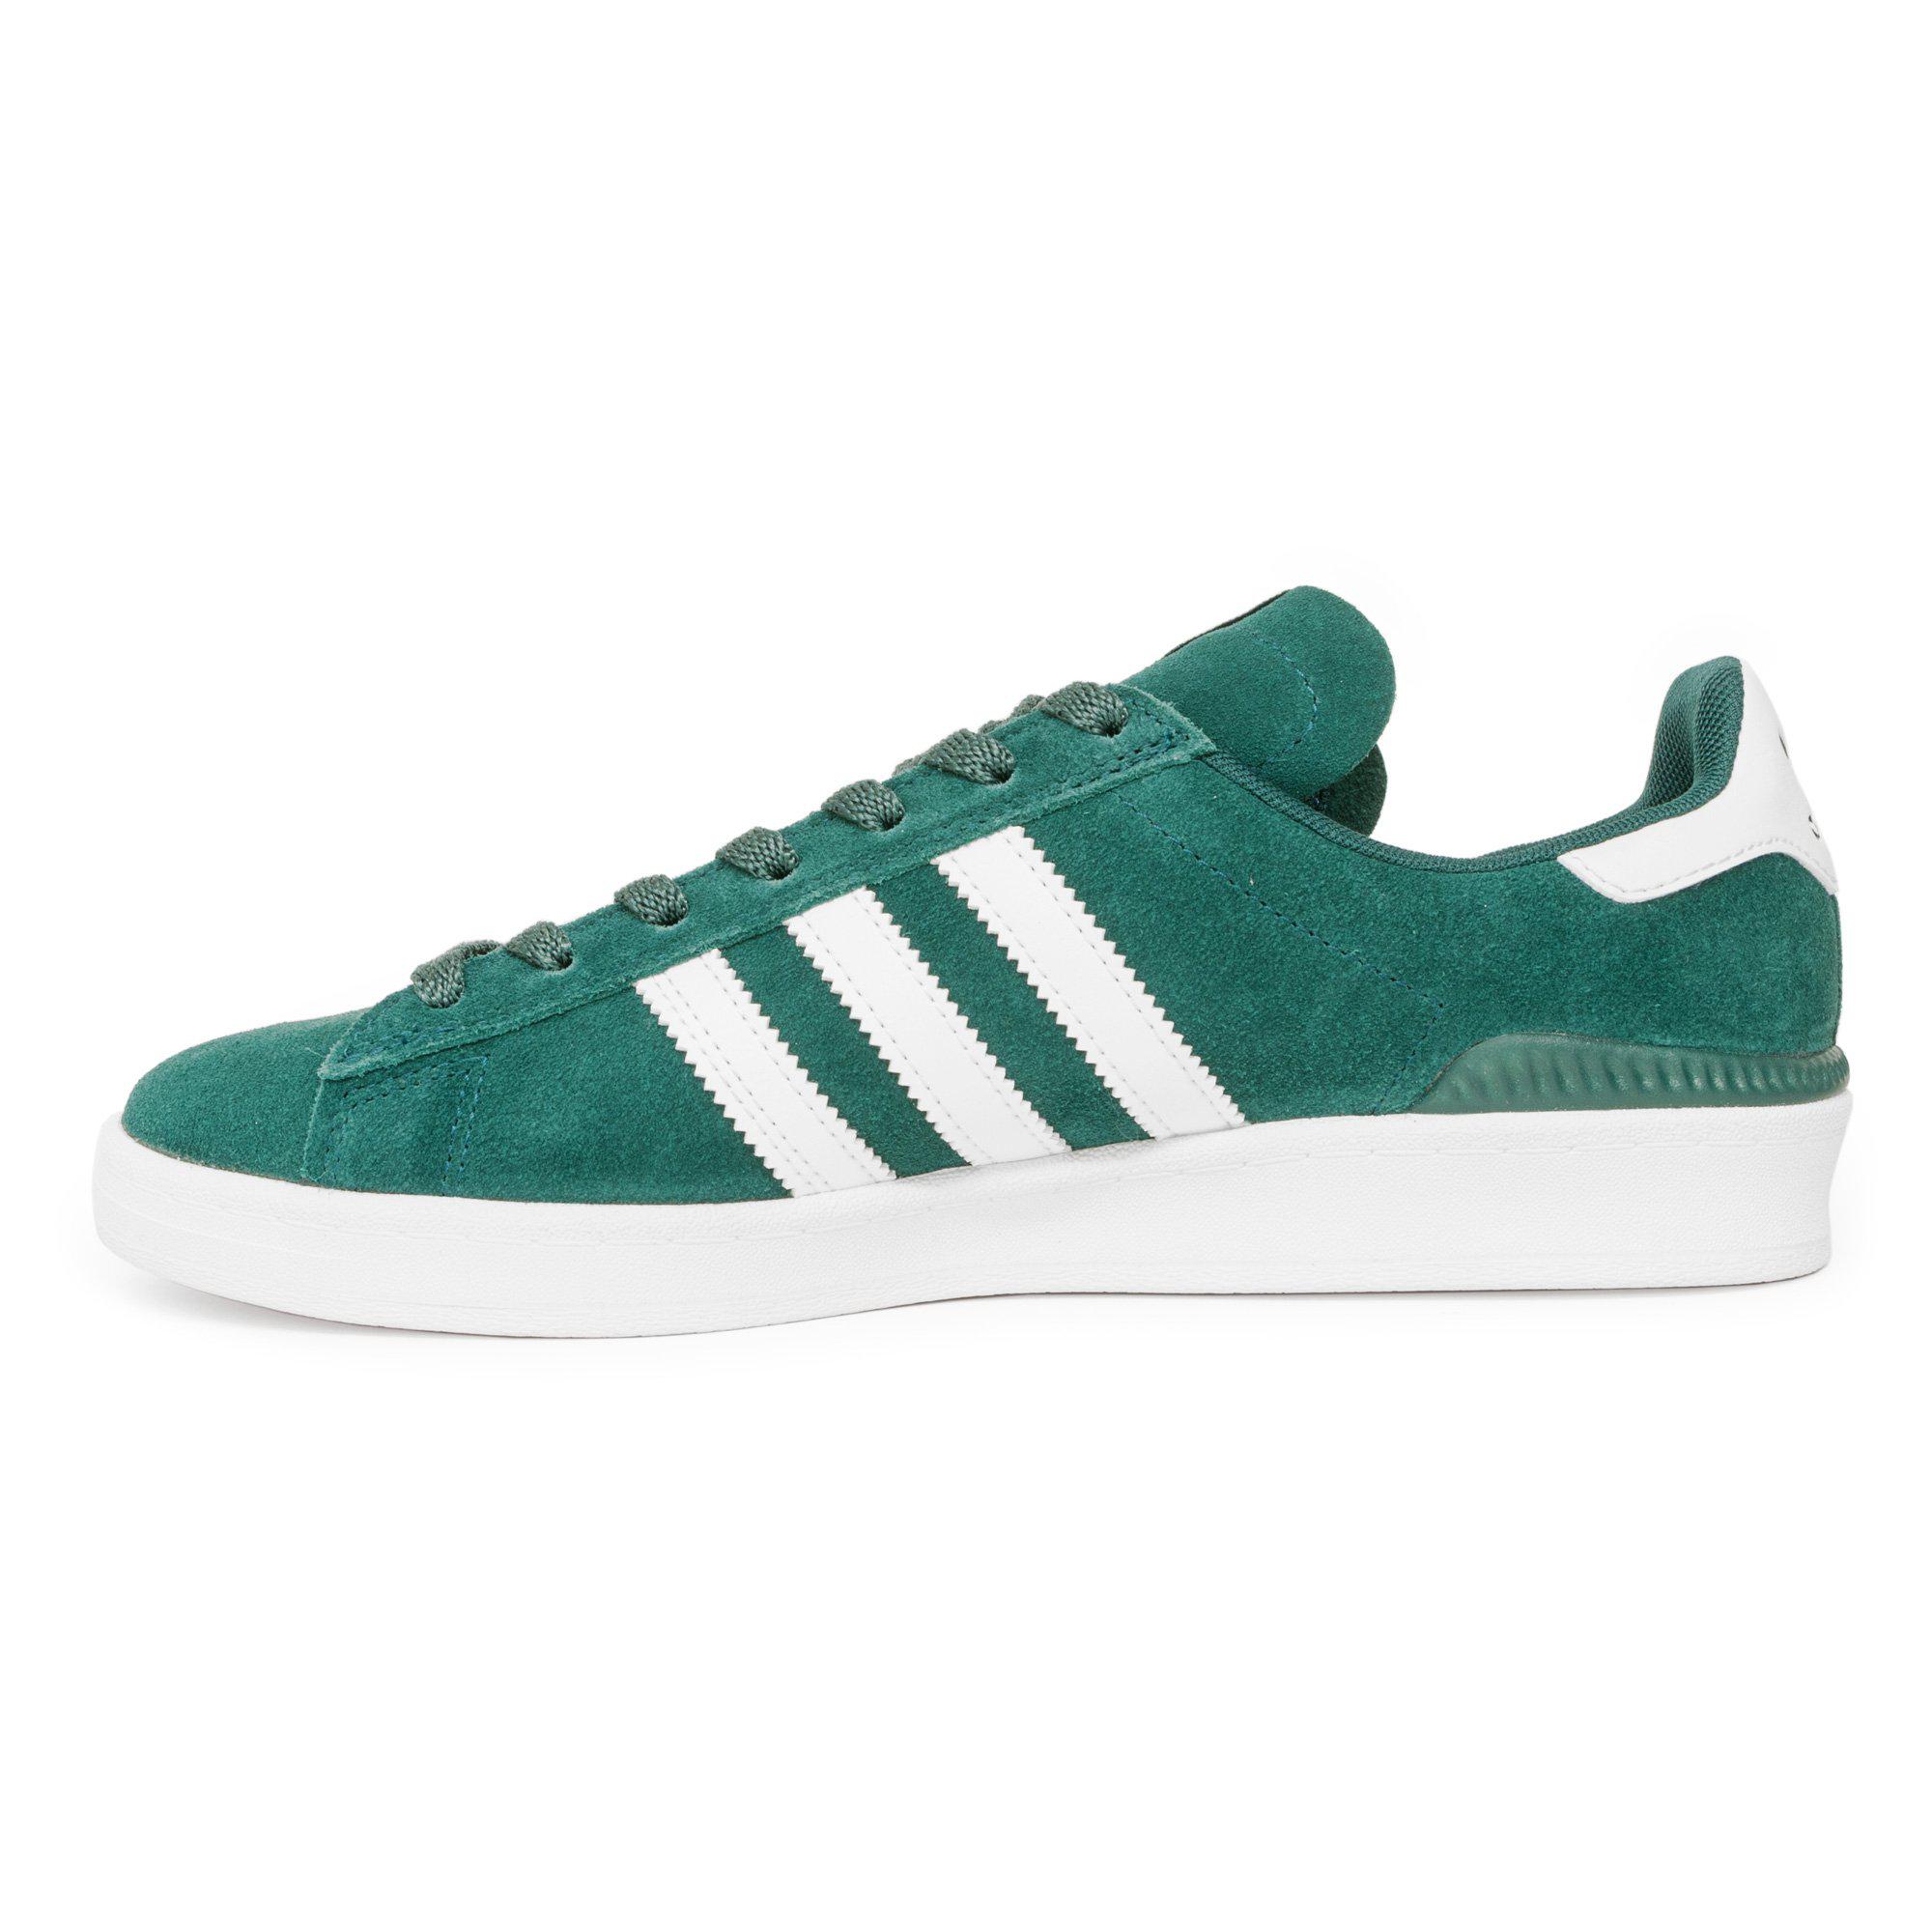 adidas Suede Campus Adv Shoes in Green for Men - Lyst